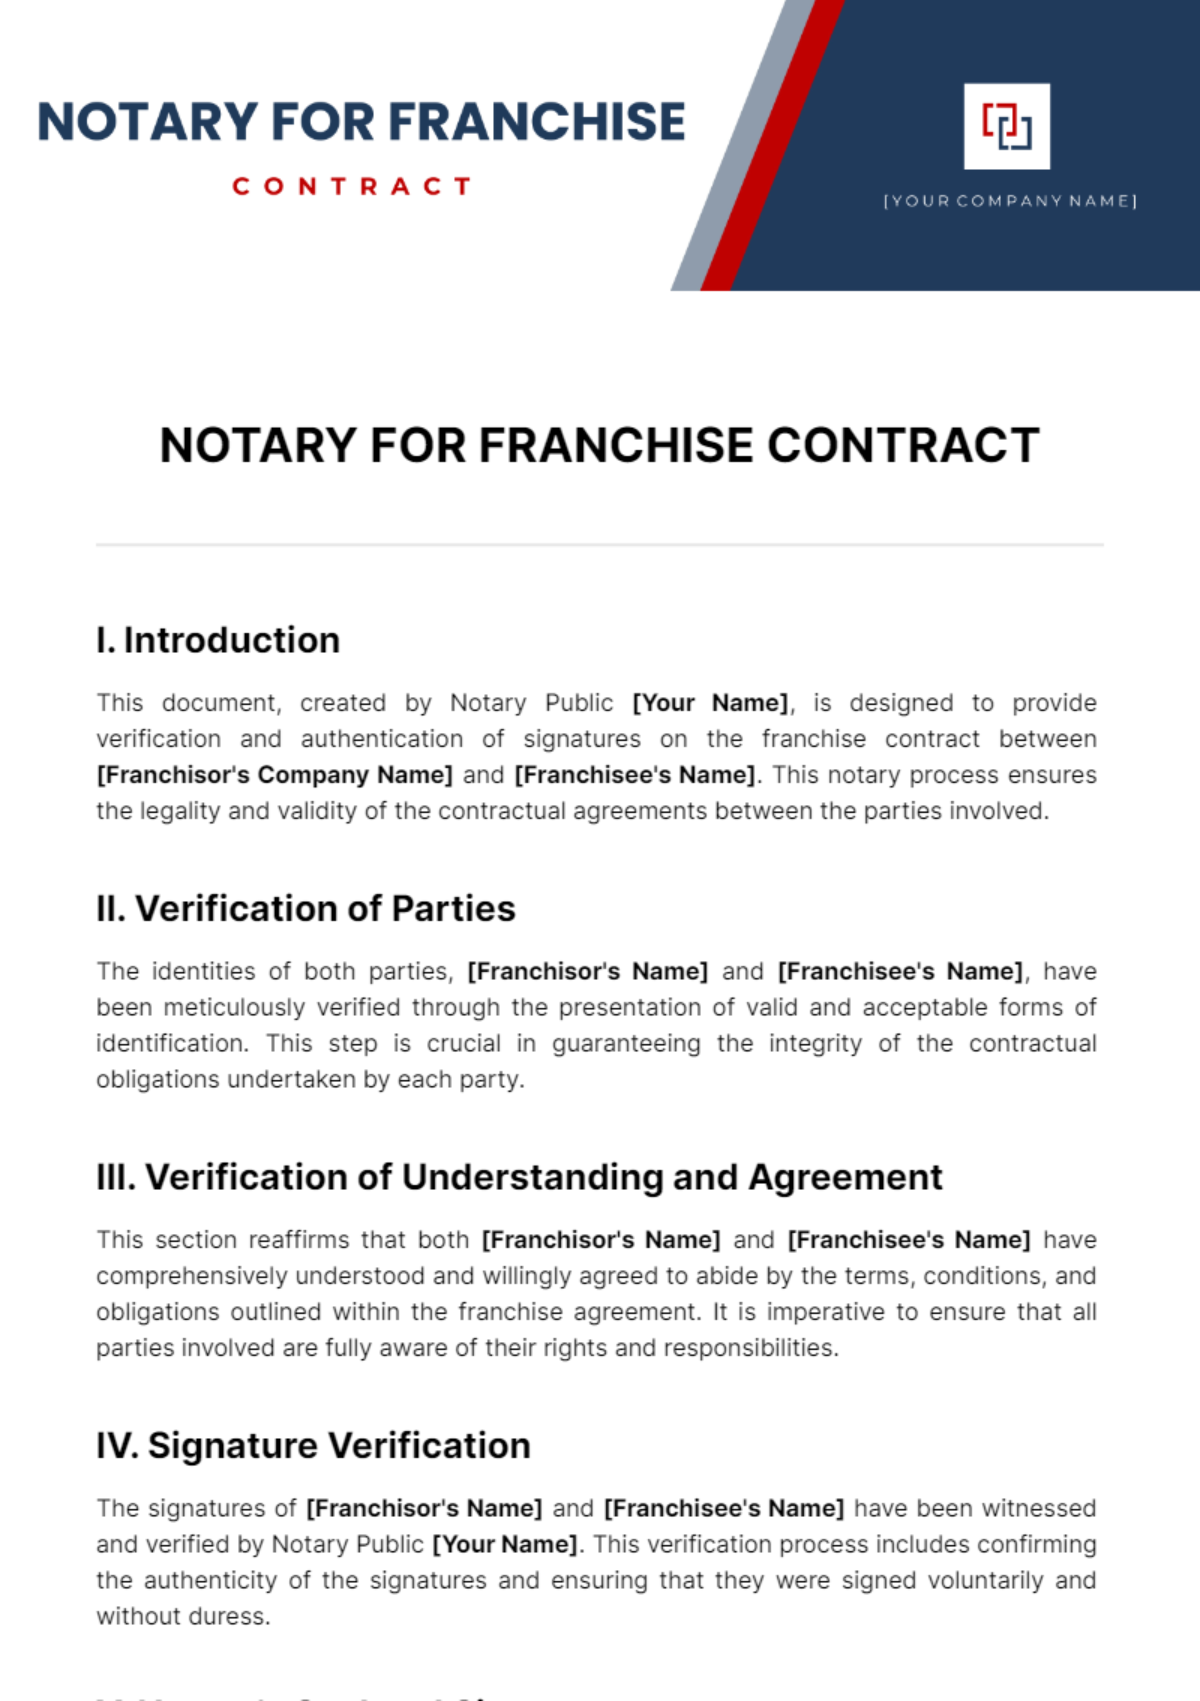 Free Notary for Franchise Contract Template